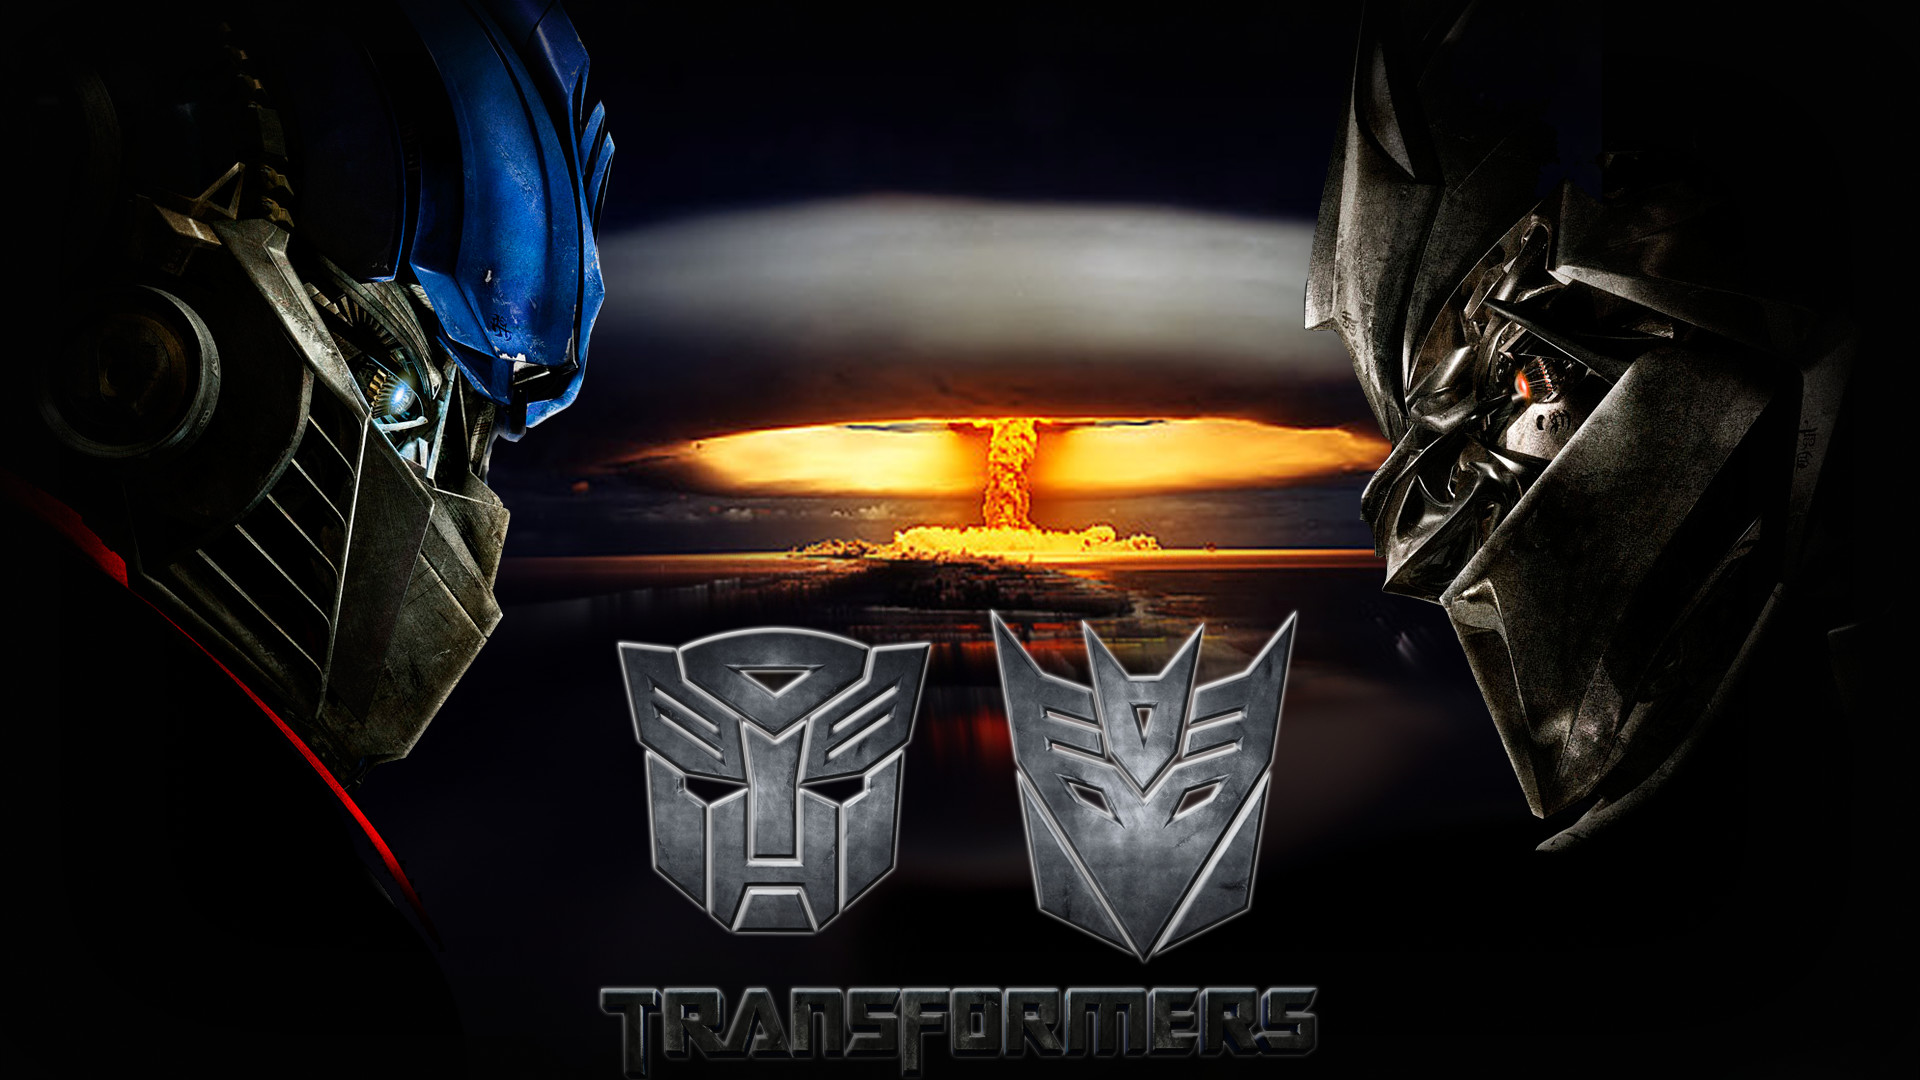 New Transformers Wallpapers, View - Hd Wallpaper Transformers Logo Hd -  1920x1080 Wallpaper 